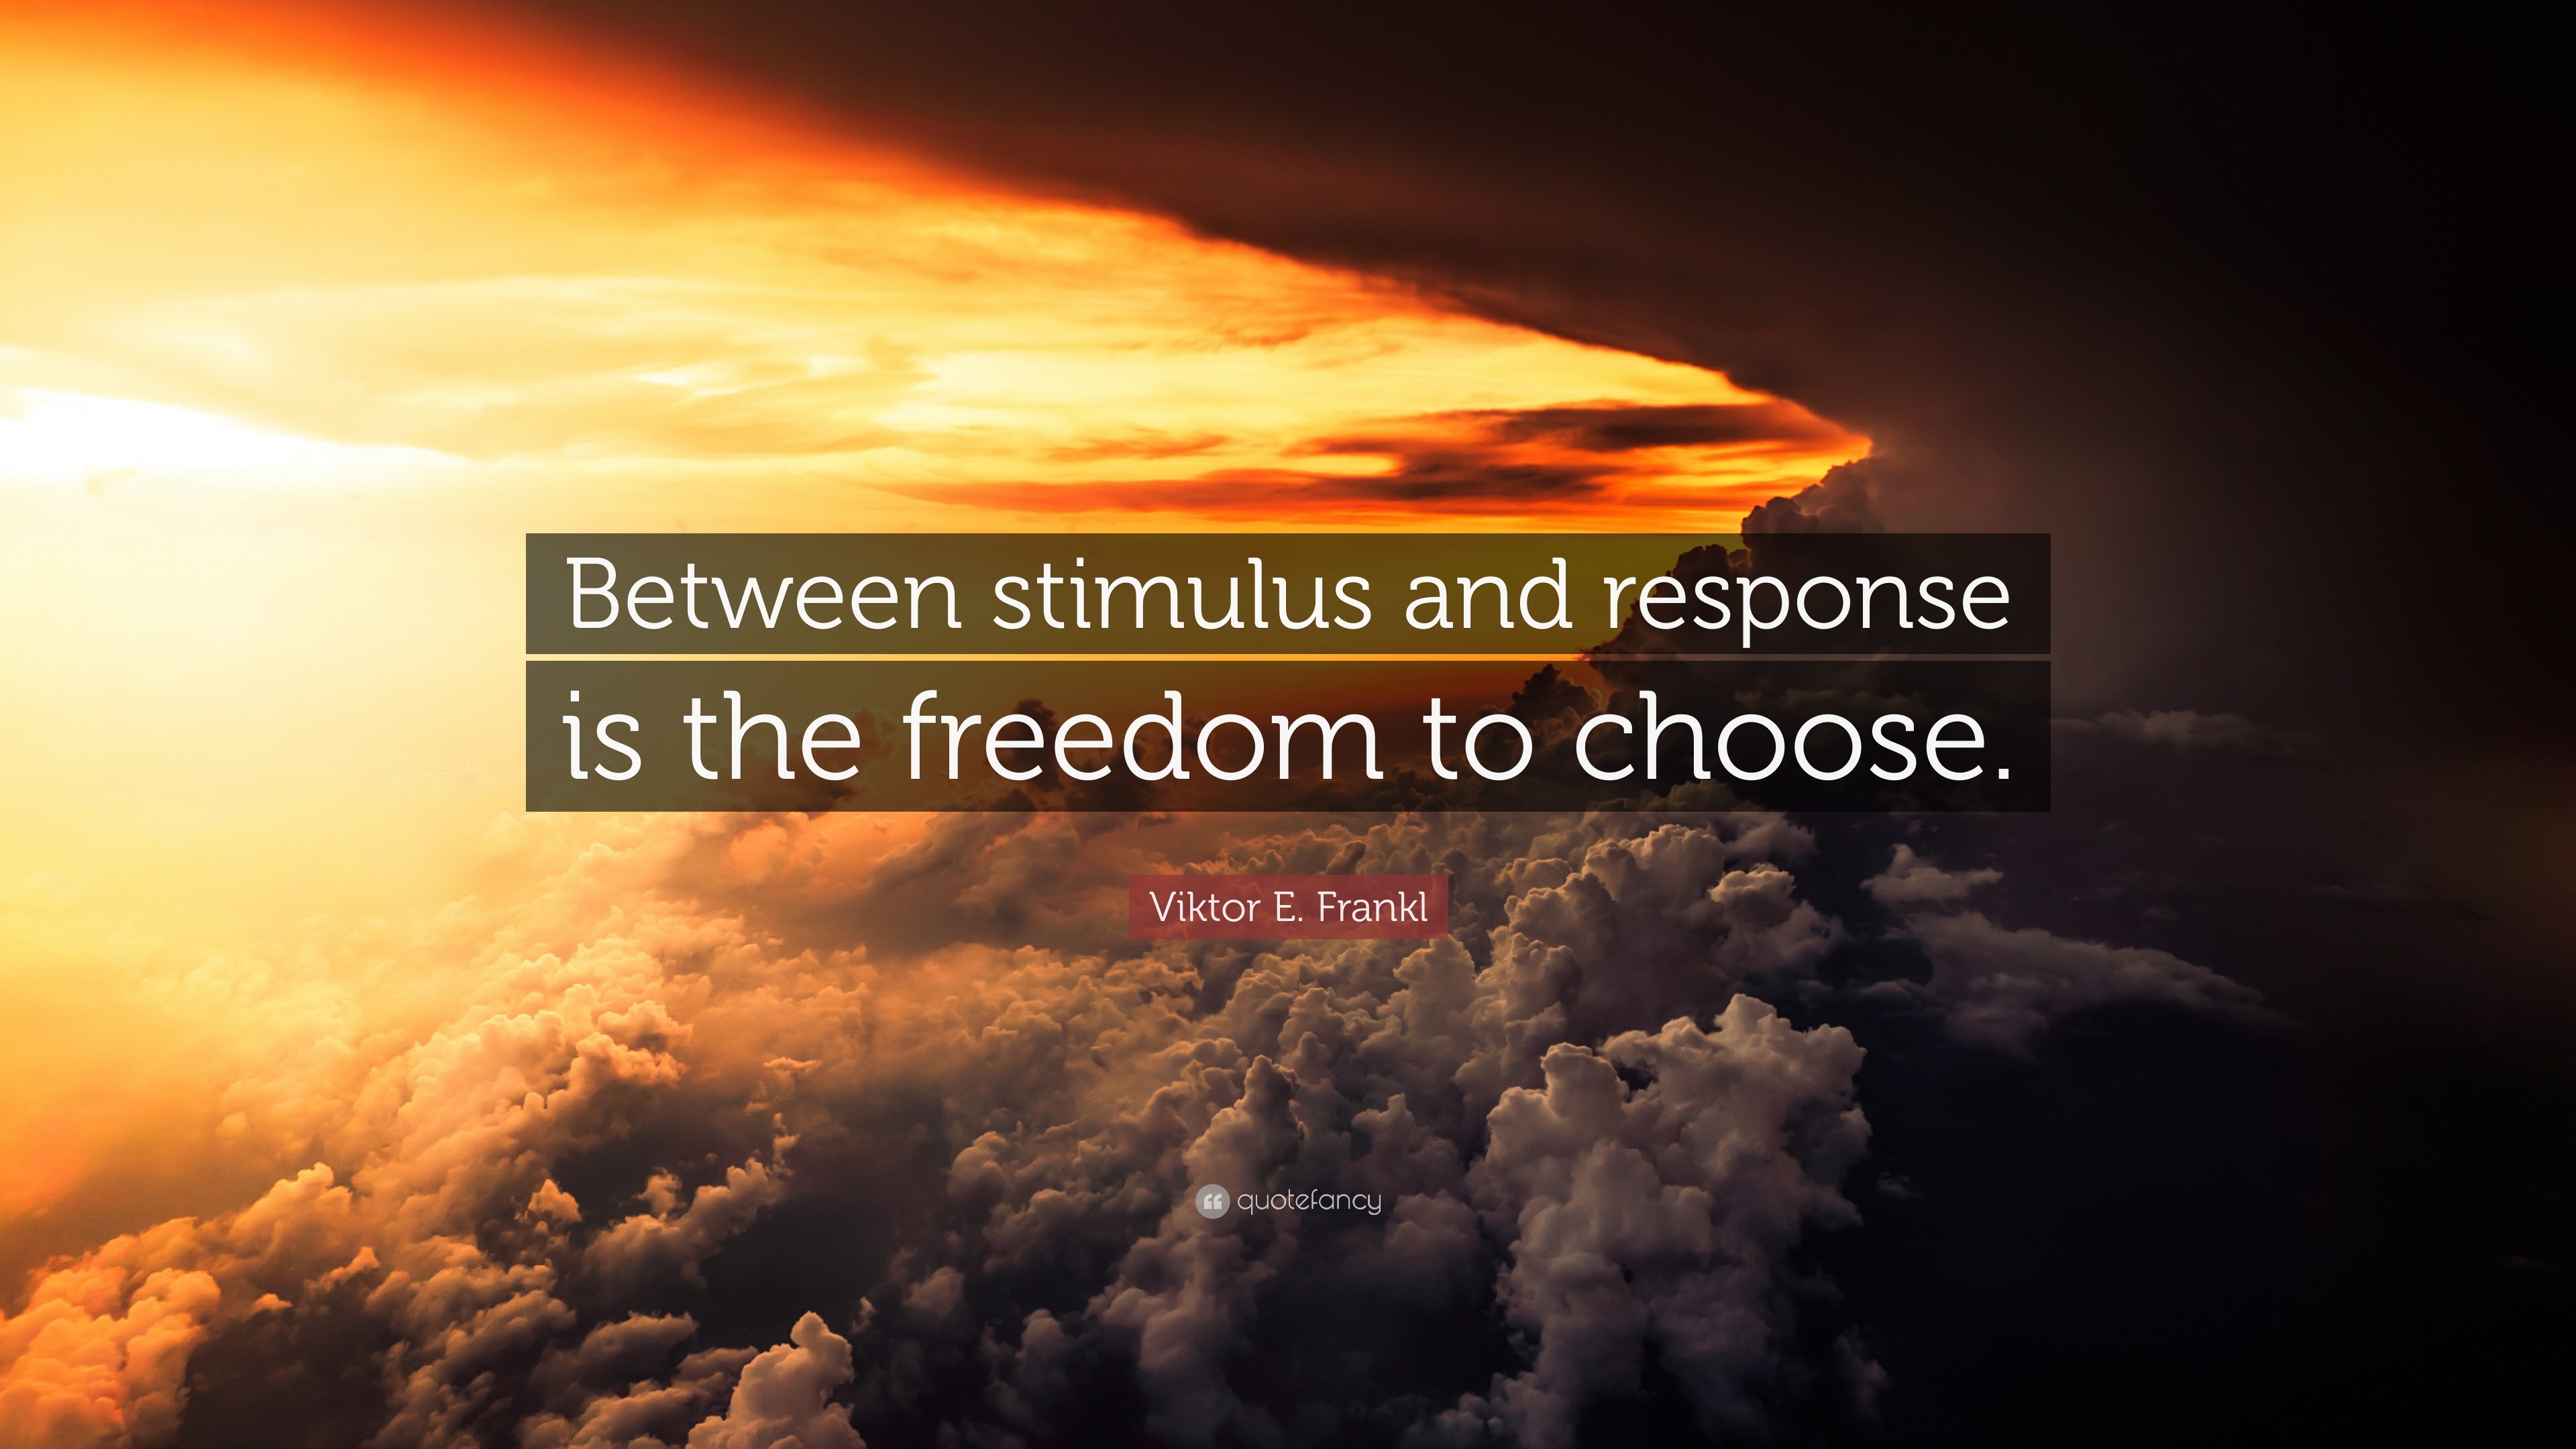 stimulus response freedom between frankl viktor quote wallpapers quotefancy